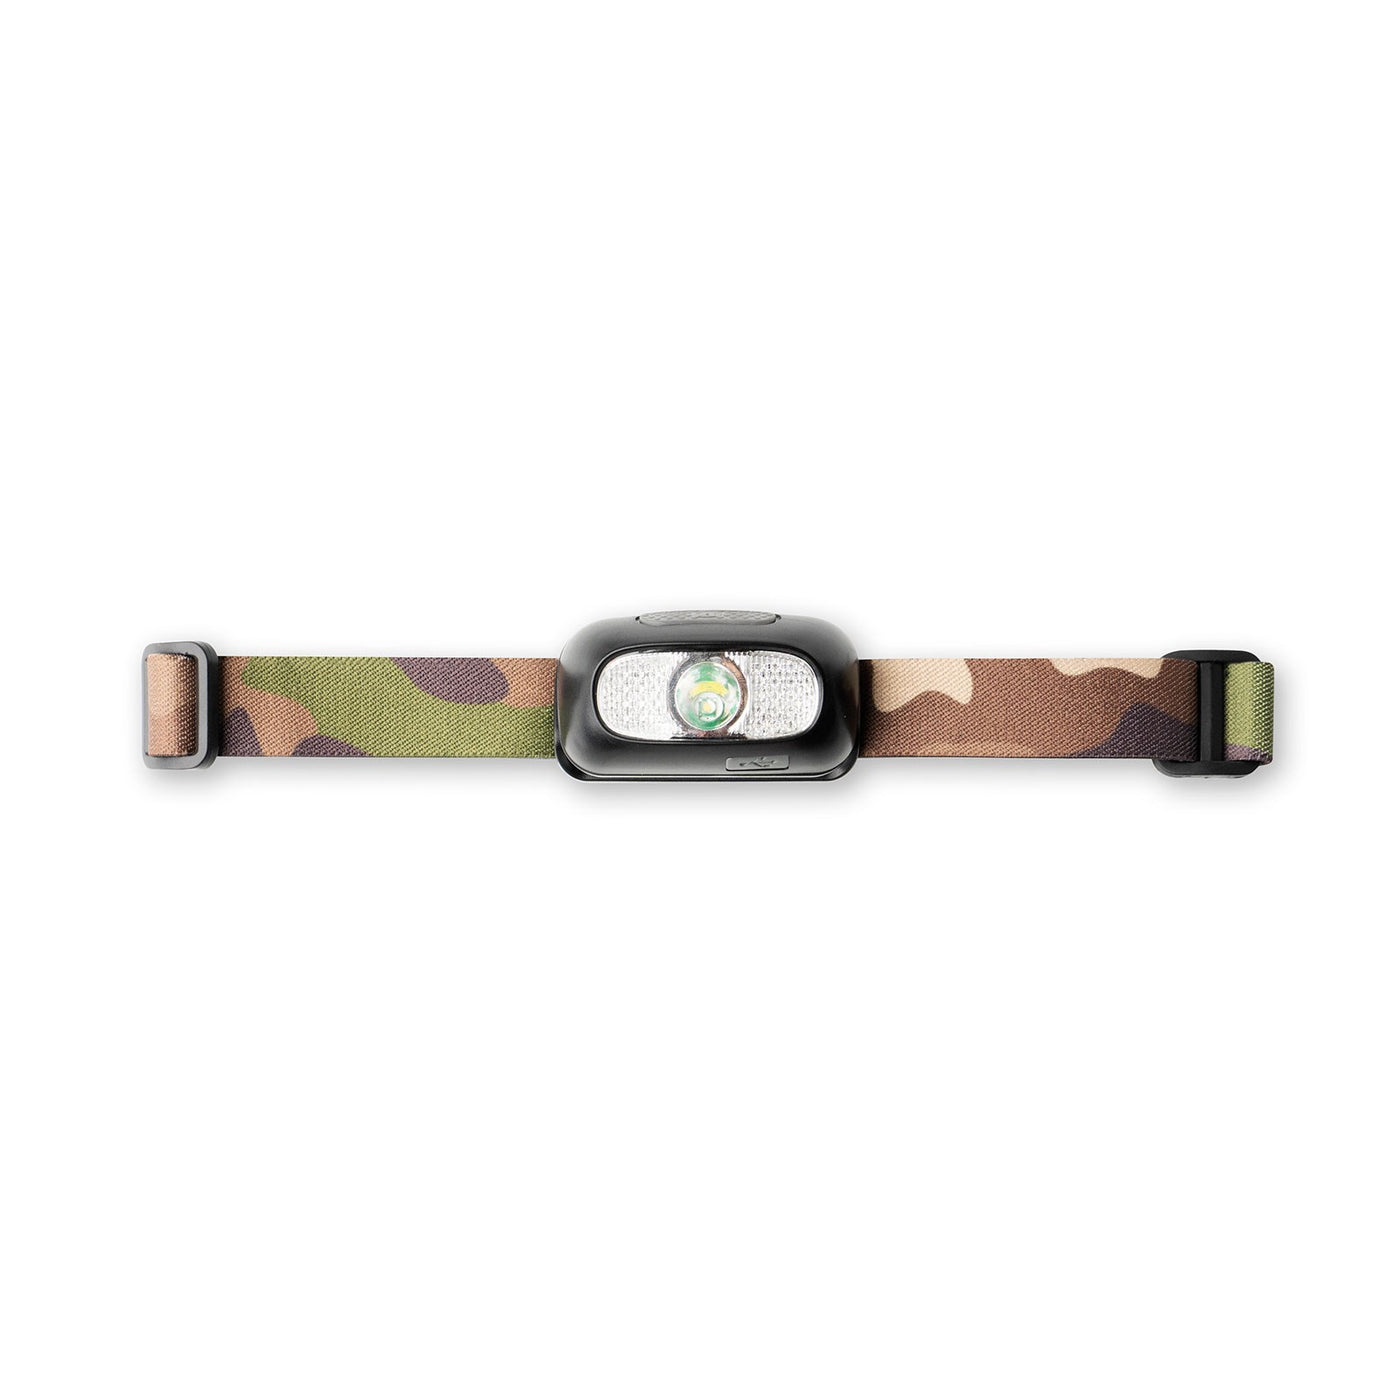 Night Scope Rechargeable Head Lamp